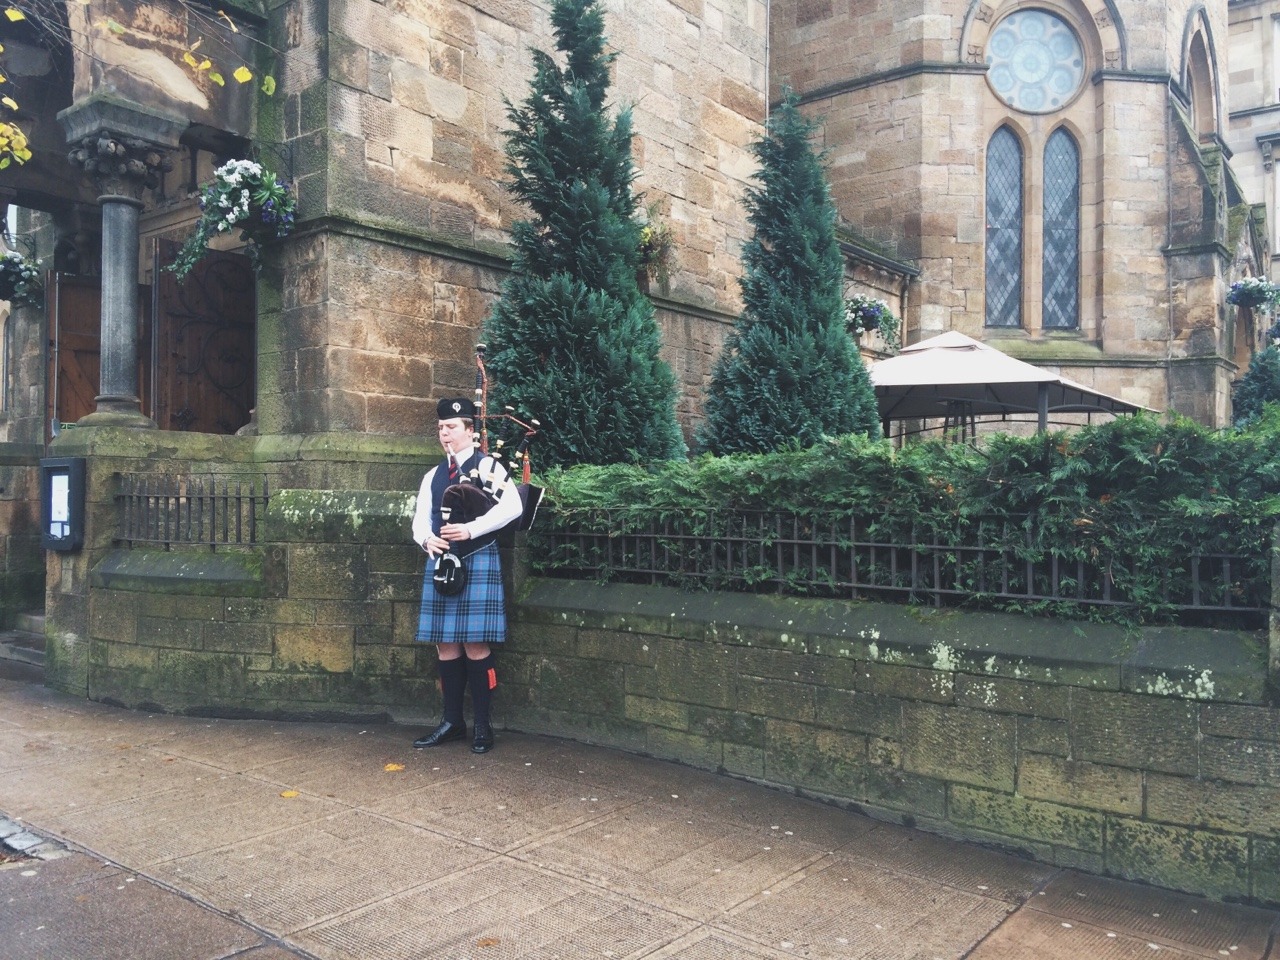 You're not really in Scotland until you see a Scottish man wearing a kilt playing the bagpipes